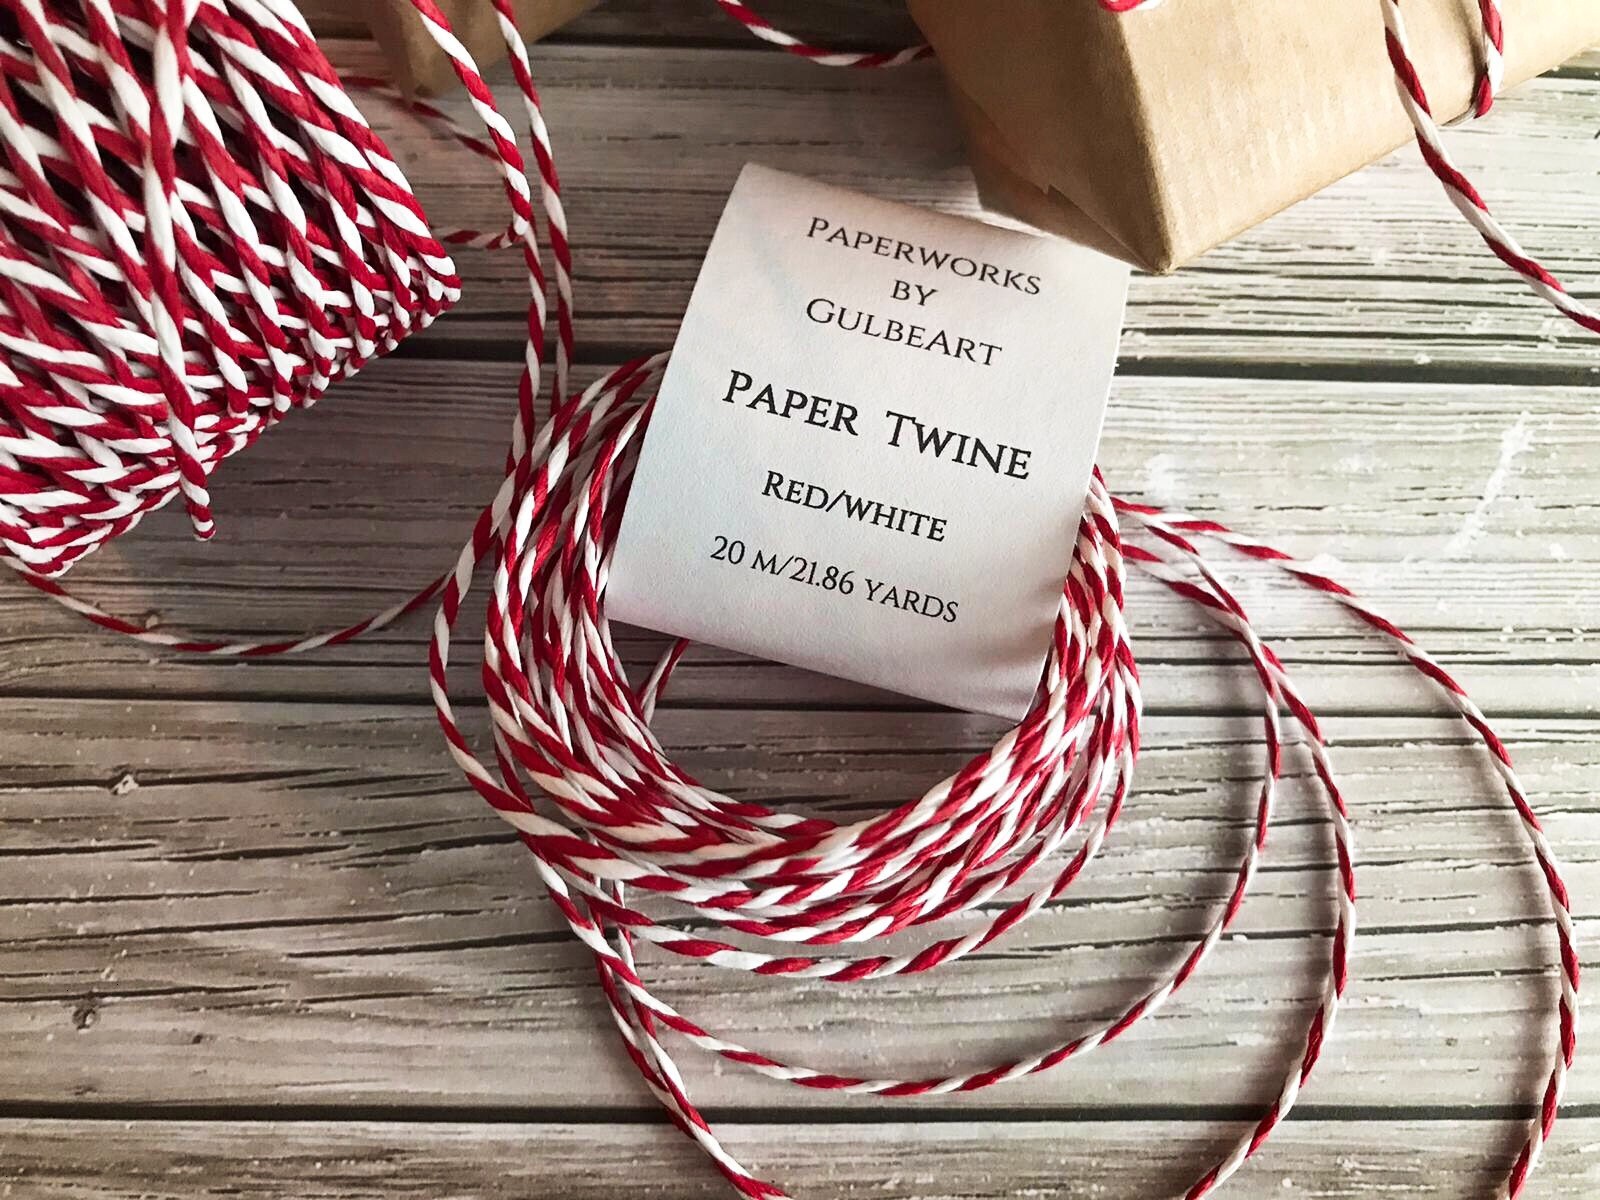 Popvcly 4 Roll Christmas Twine Cotton String Rope Cord 1312FT Crafts and  Christmas Holiday Wrapping Cord for Gift Wrapping Arts Crafts 